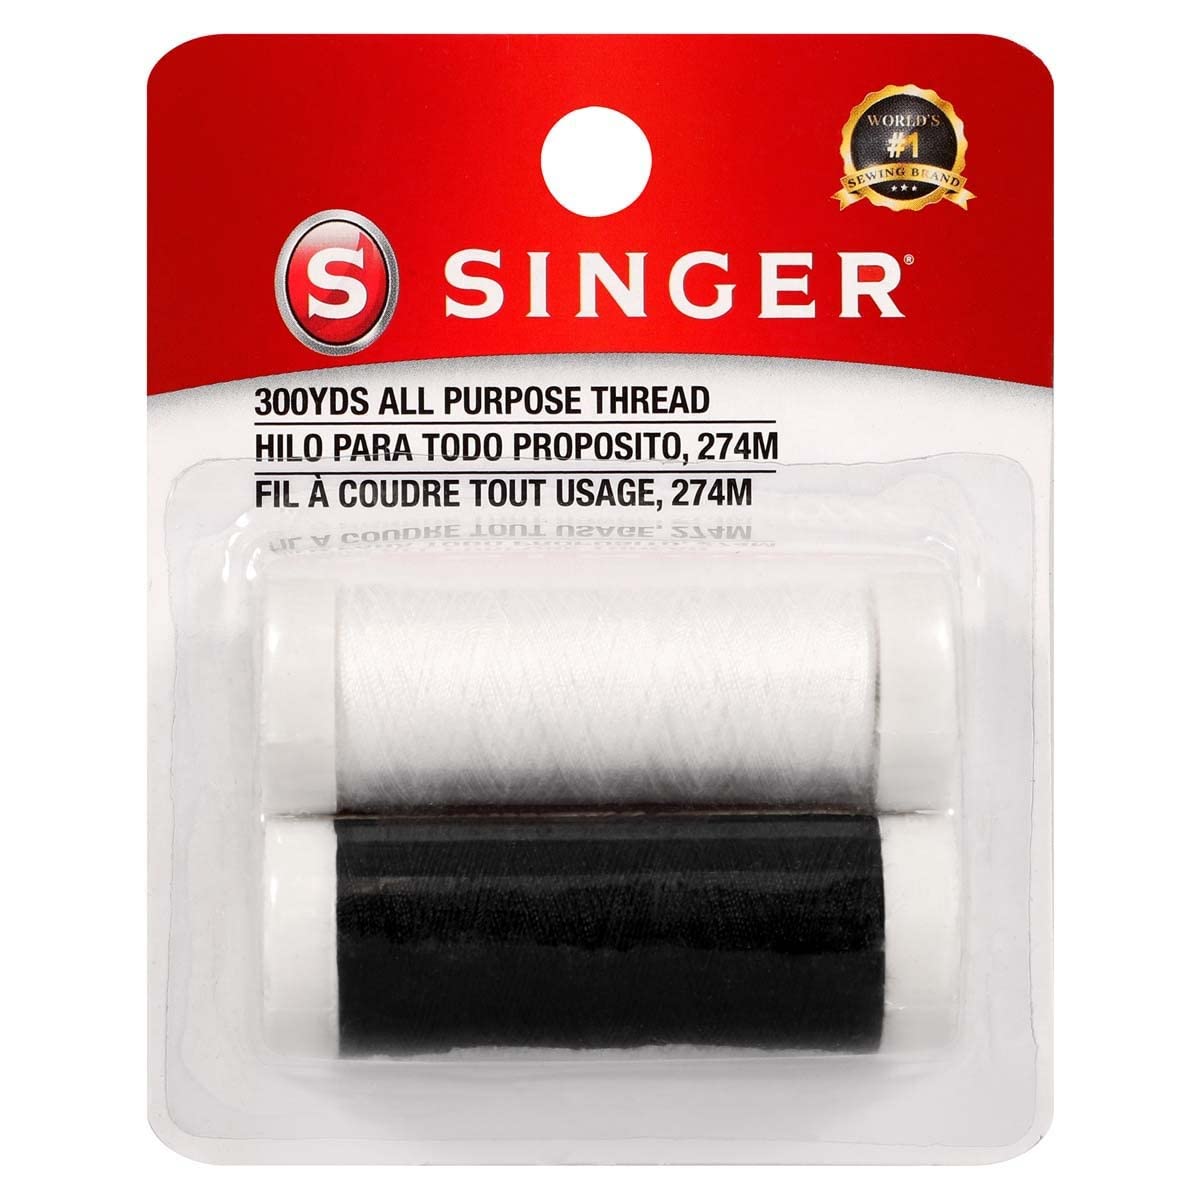 SINGER 60450 Hand Sewing Polyester Thread, 150-Yards each, Black & White